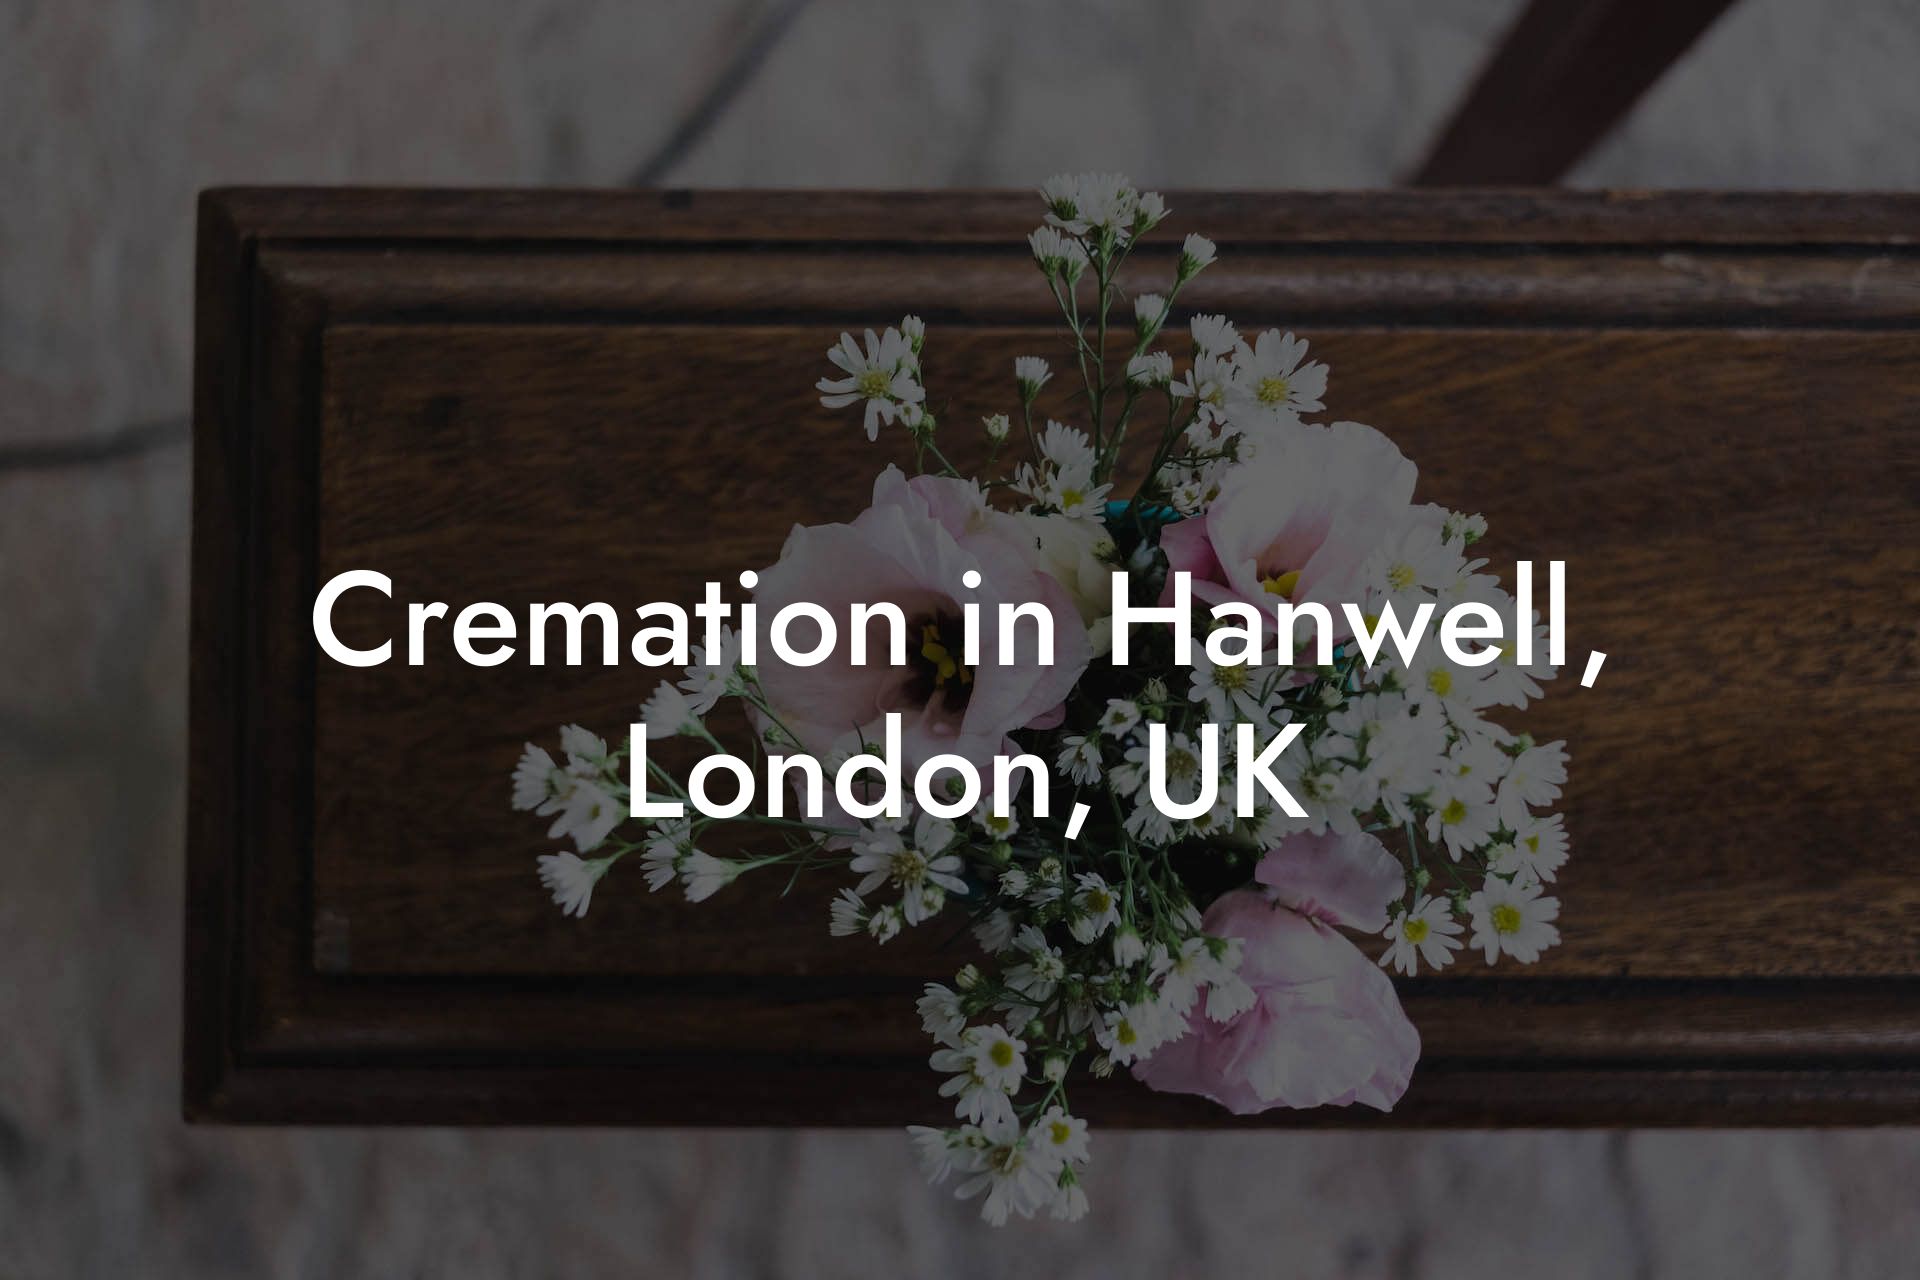 Cremation in Hanwell, London, UK